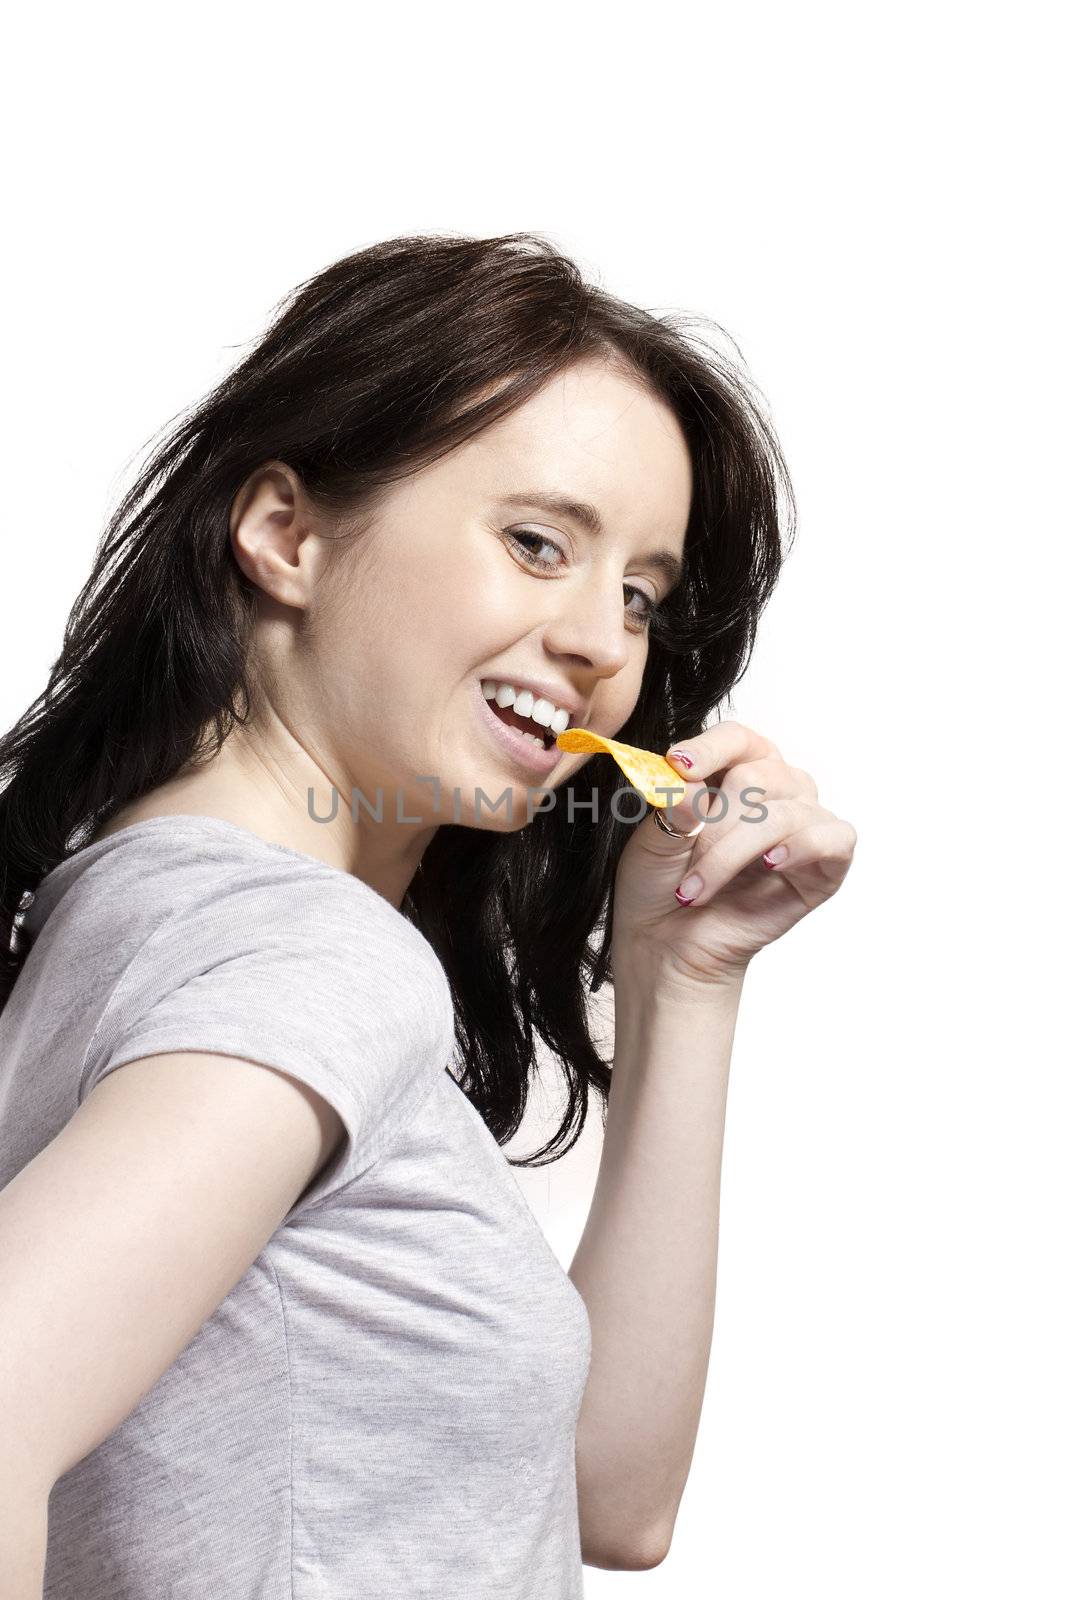 young woman from side eating potato chip with a smile